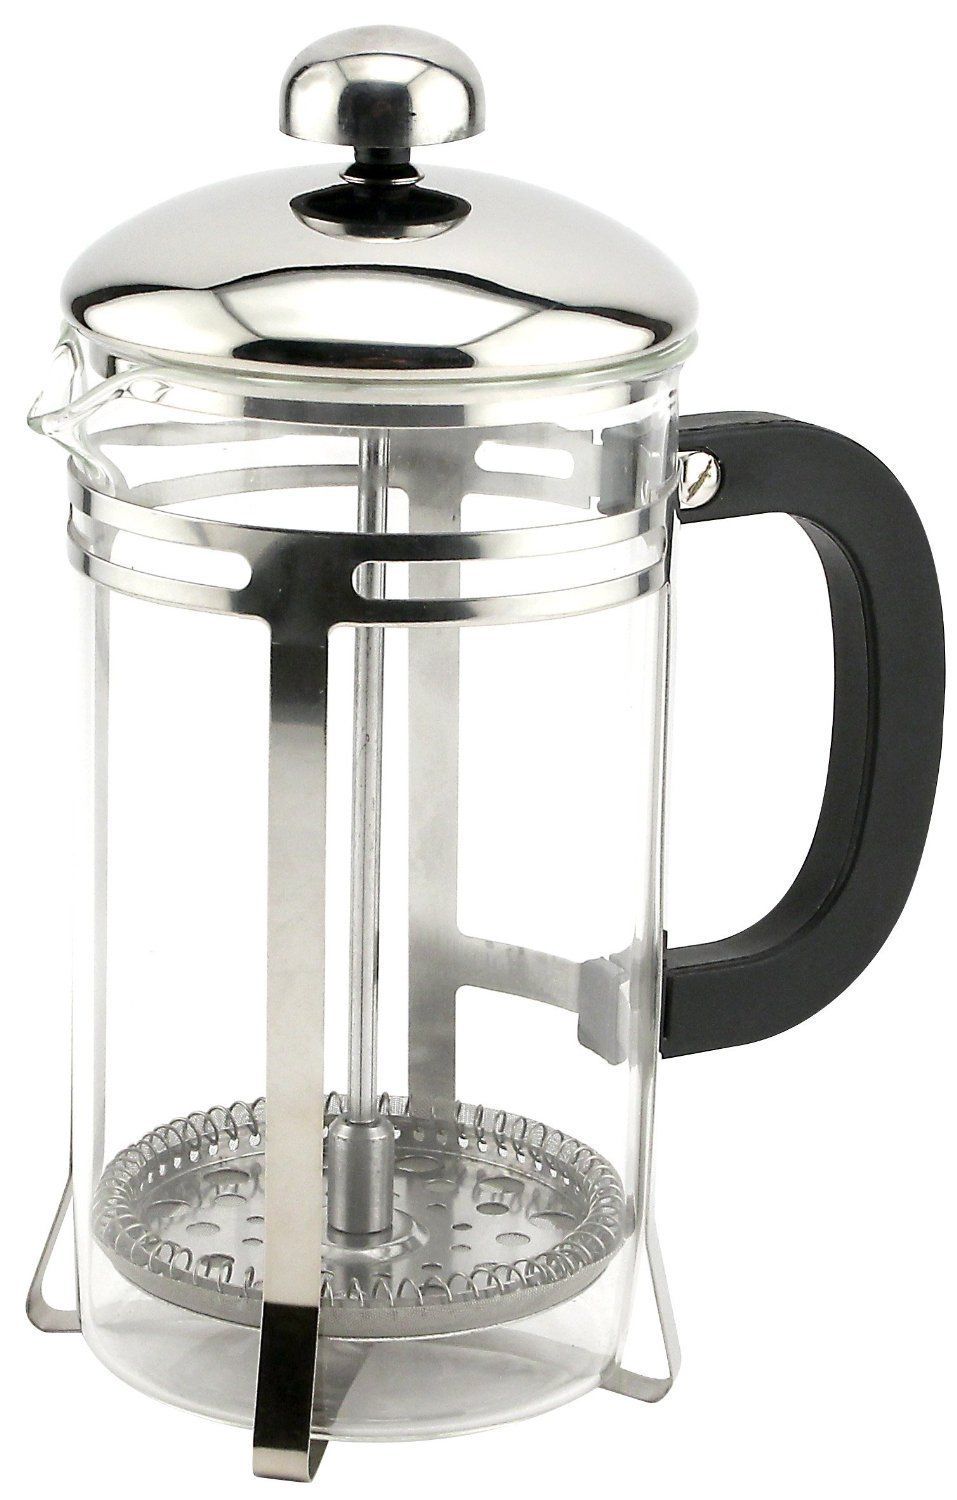 Shatter-proof French Press Coffee Maker Only $14.99 SHIPPED!